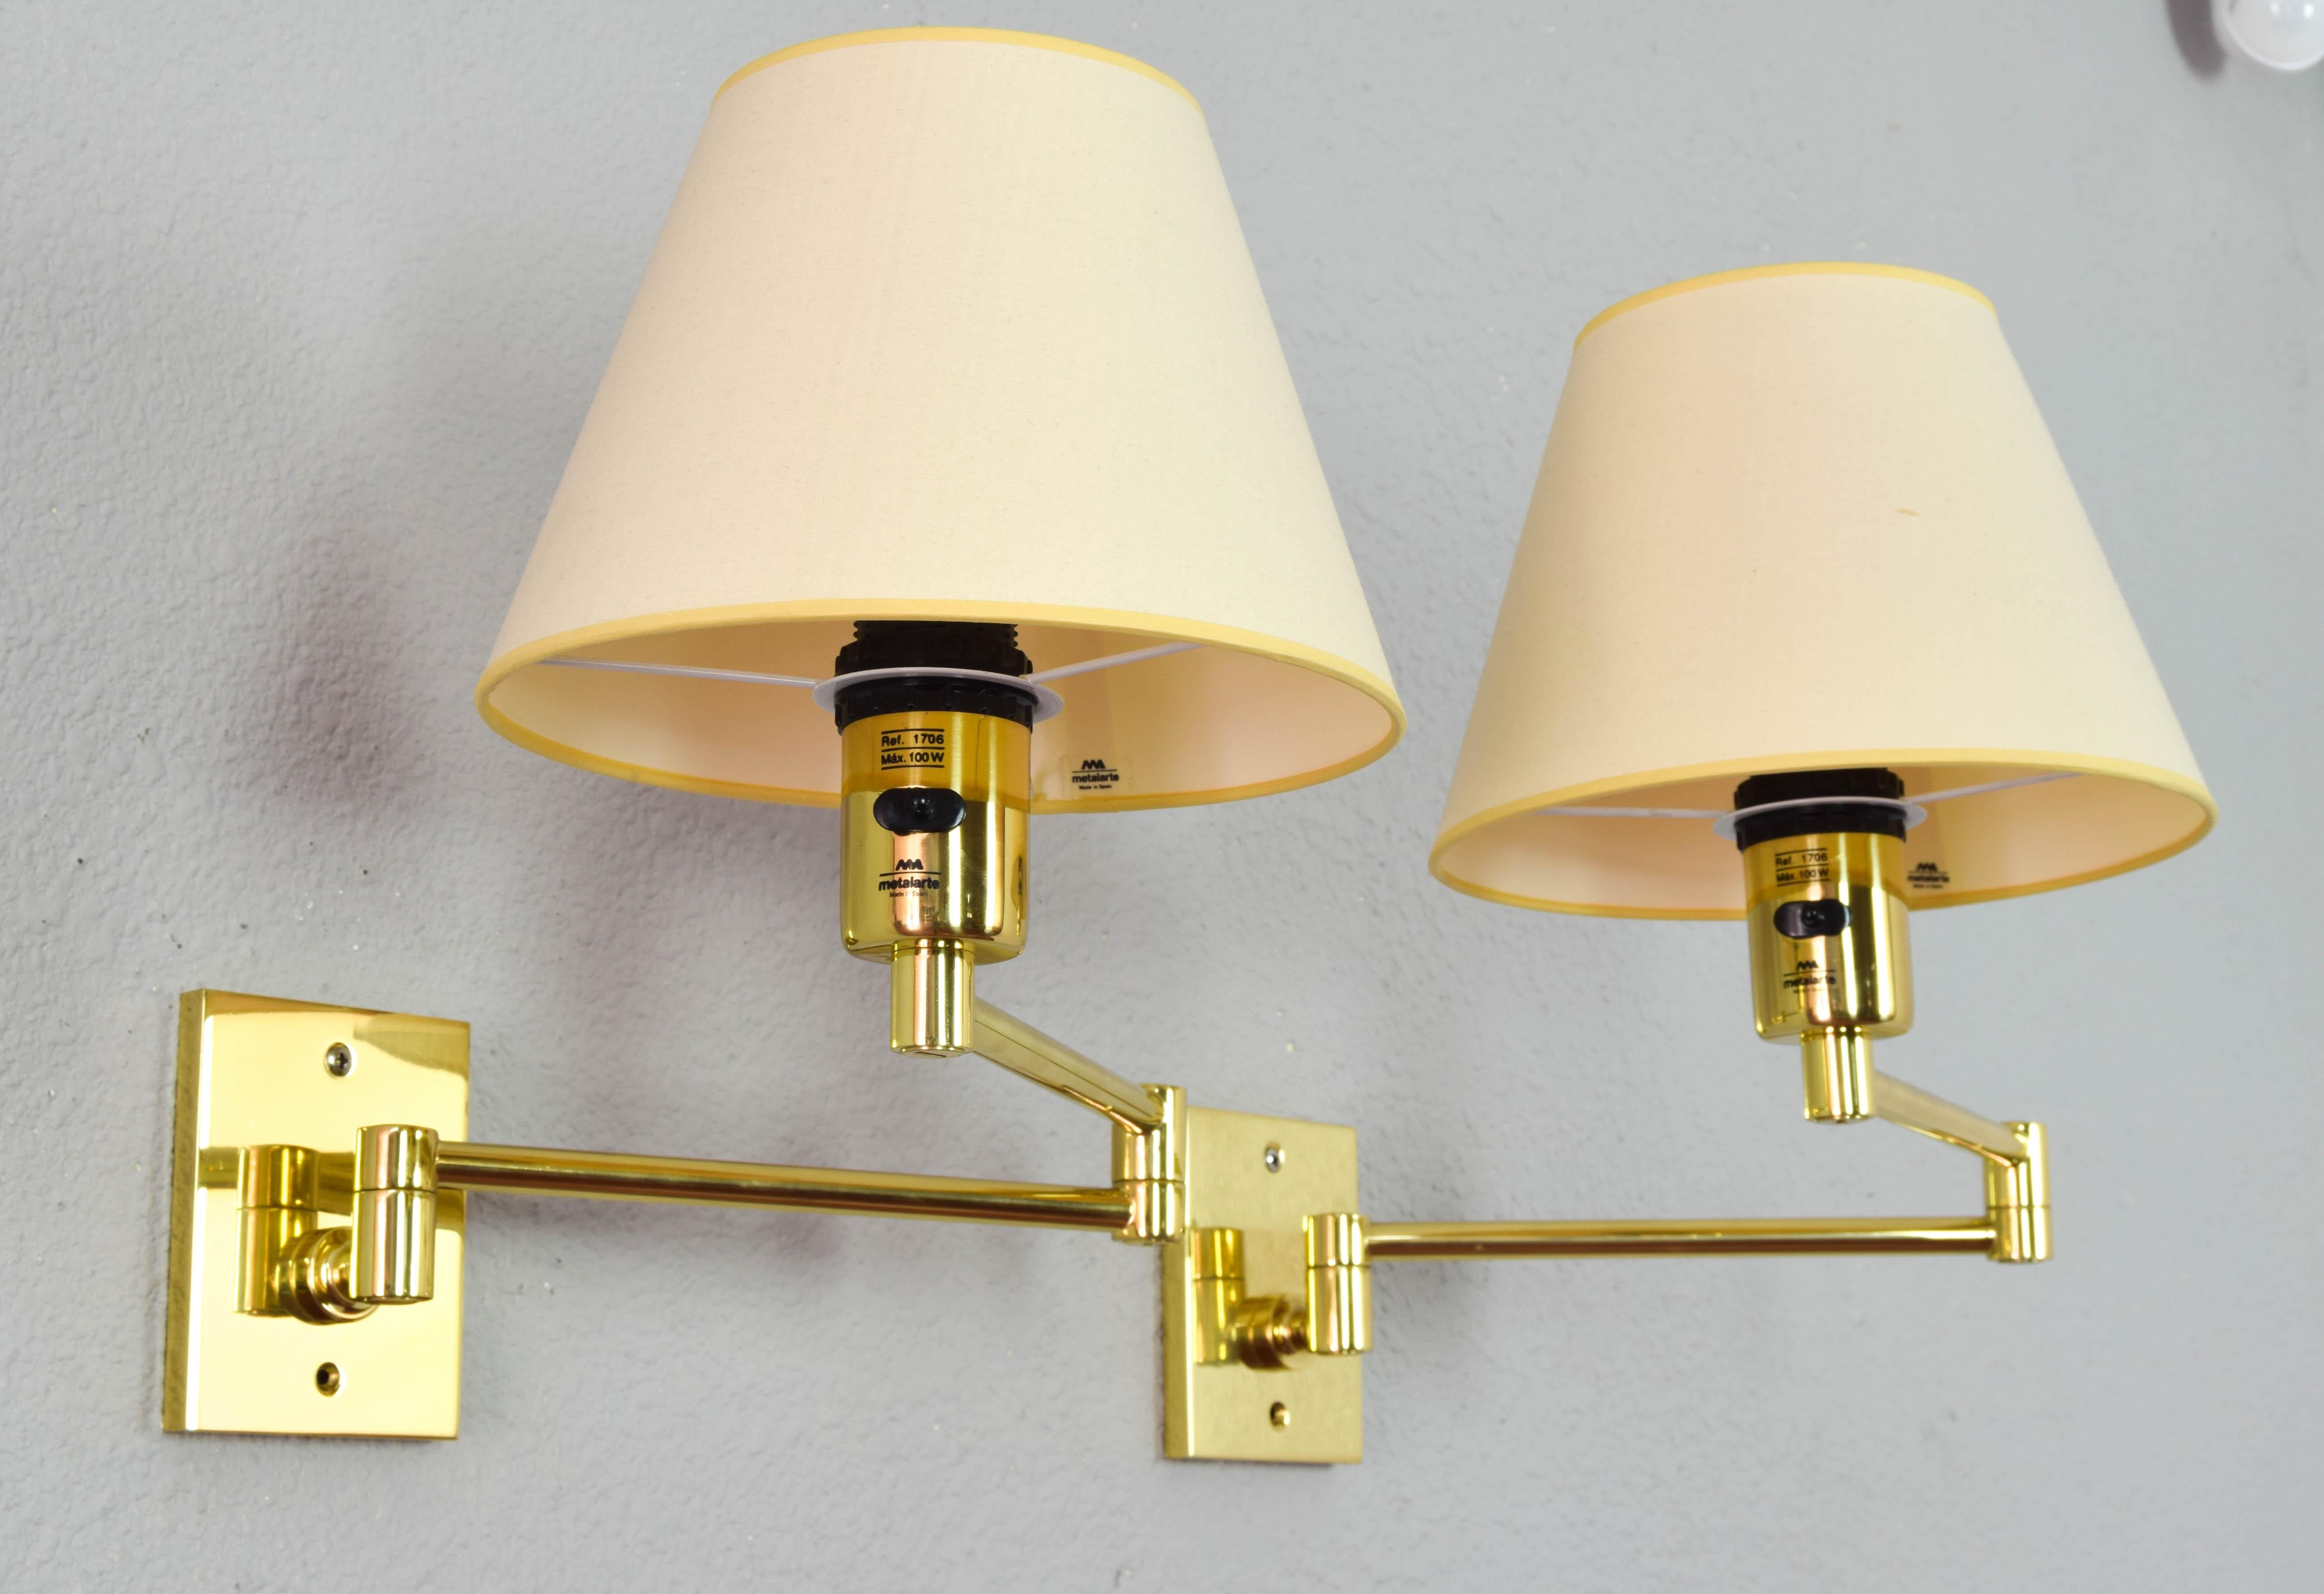 Pair of wall lights designed by George W. Hansen in the 60s and produced by the Spanish firm Metalarte with permission from Hansen Lamps New York in the 70s. Brass structure and articulated arm.
Structures in good working order.
Brass in very good